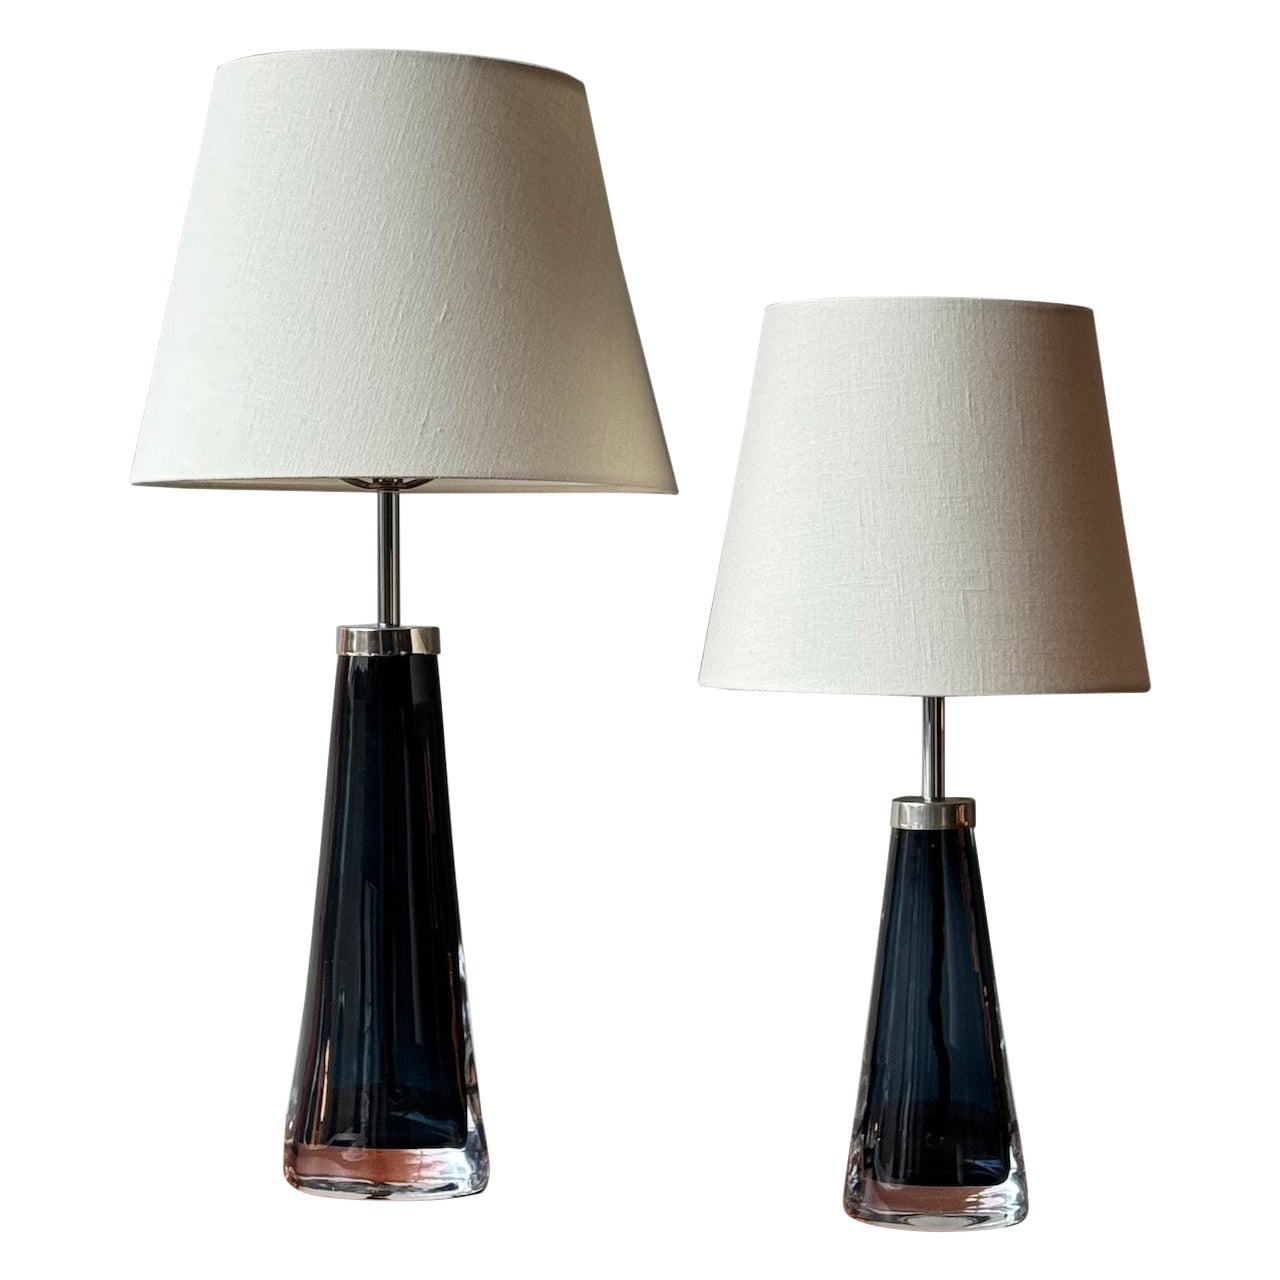 A Pair of Glass Table Lamps, Carl Fagerlund, Orrefors Sweden, 1960s For Sale